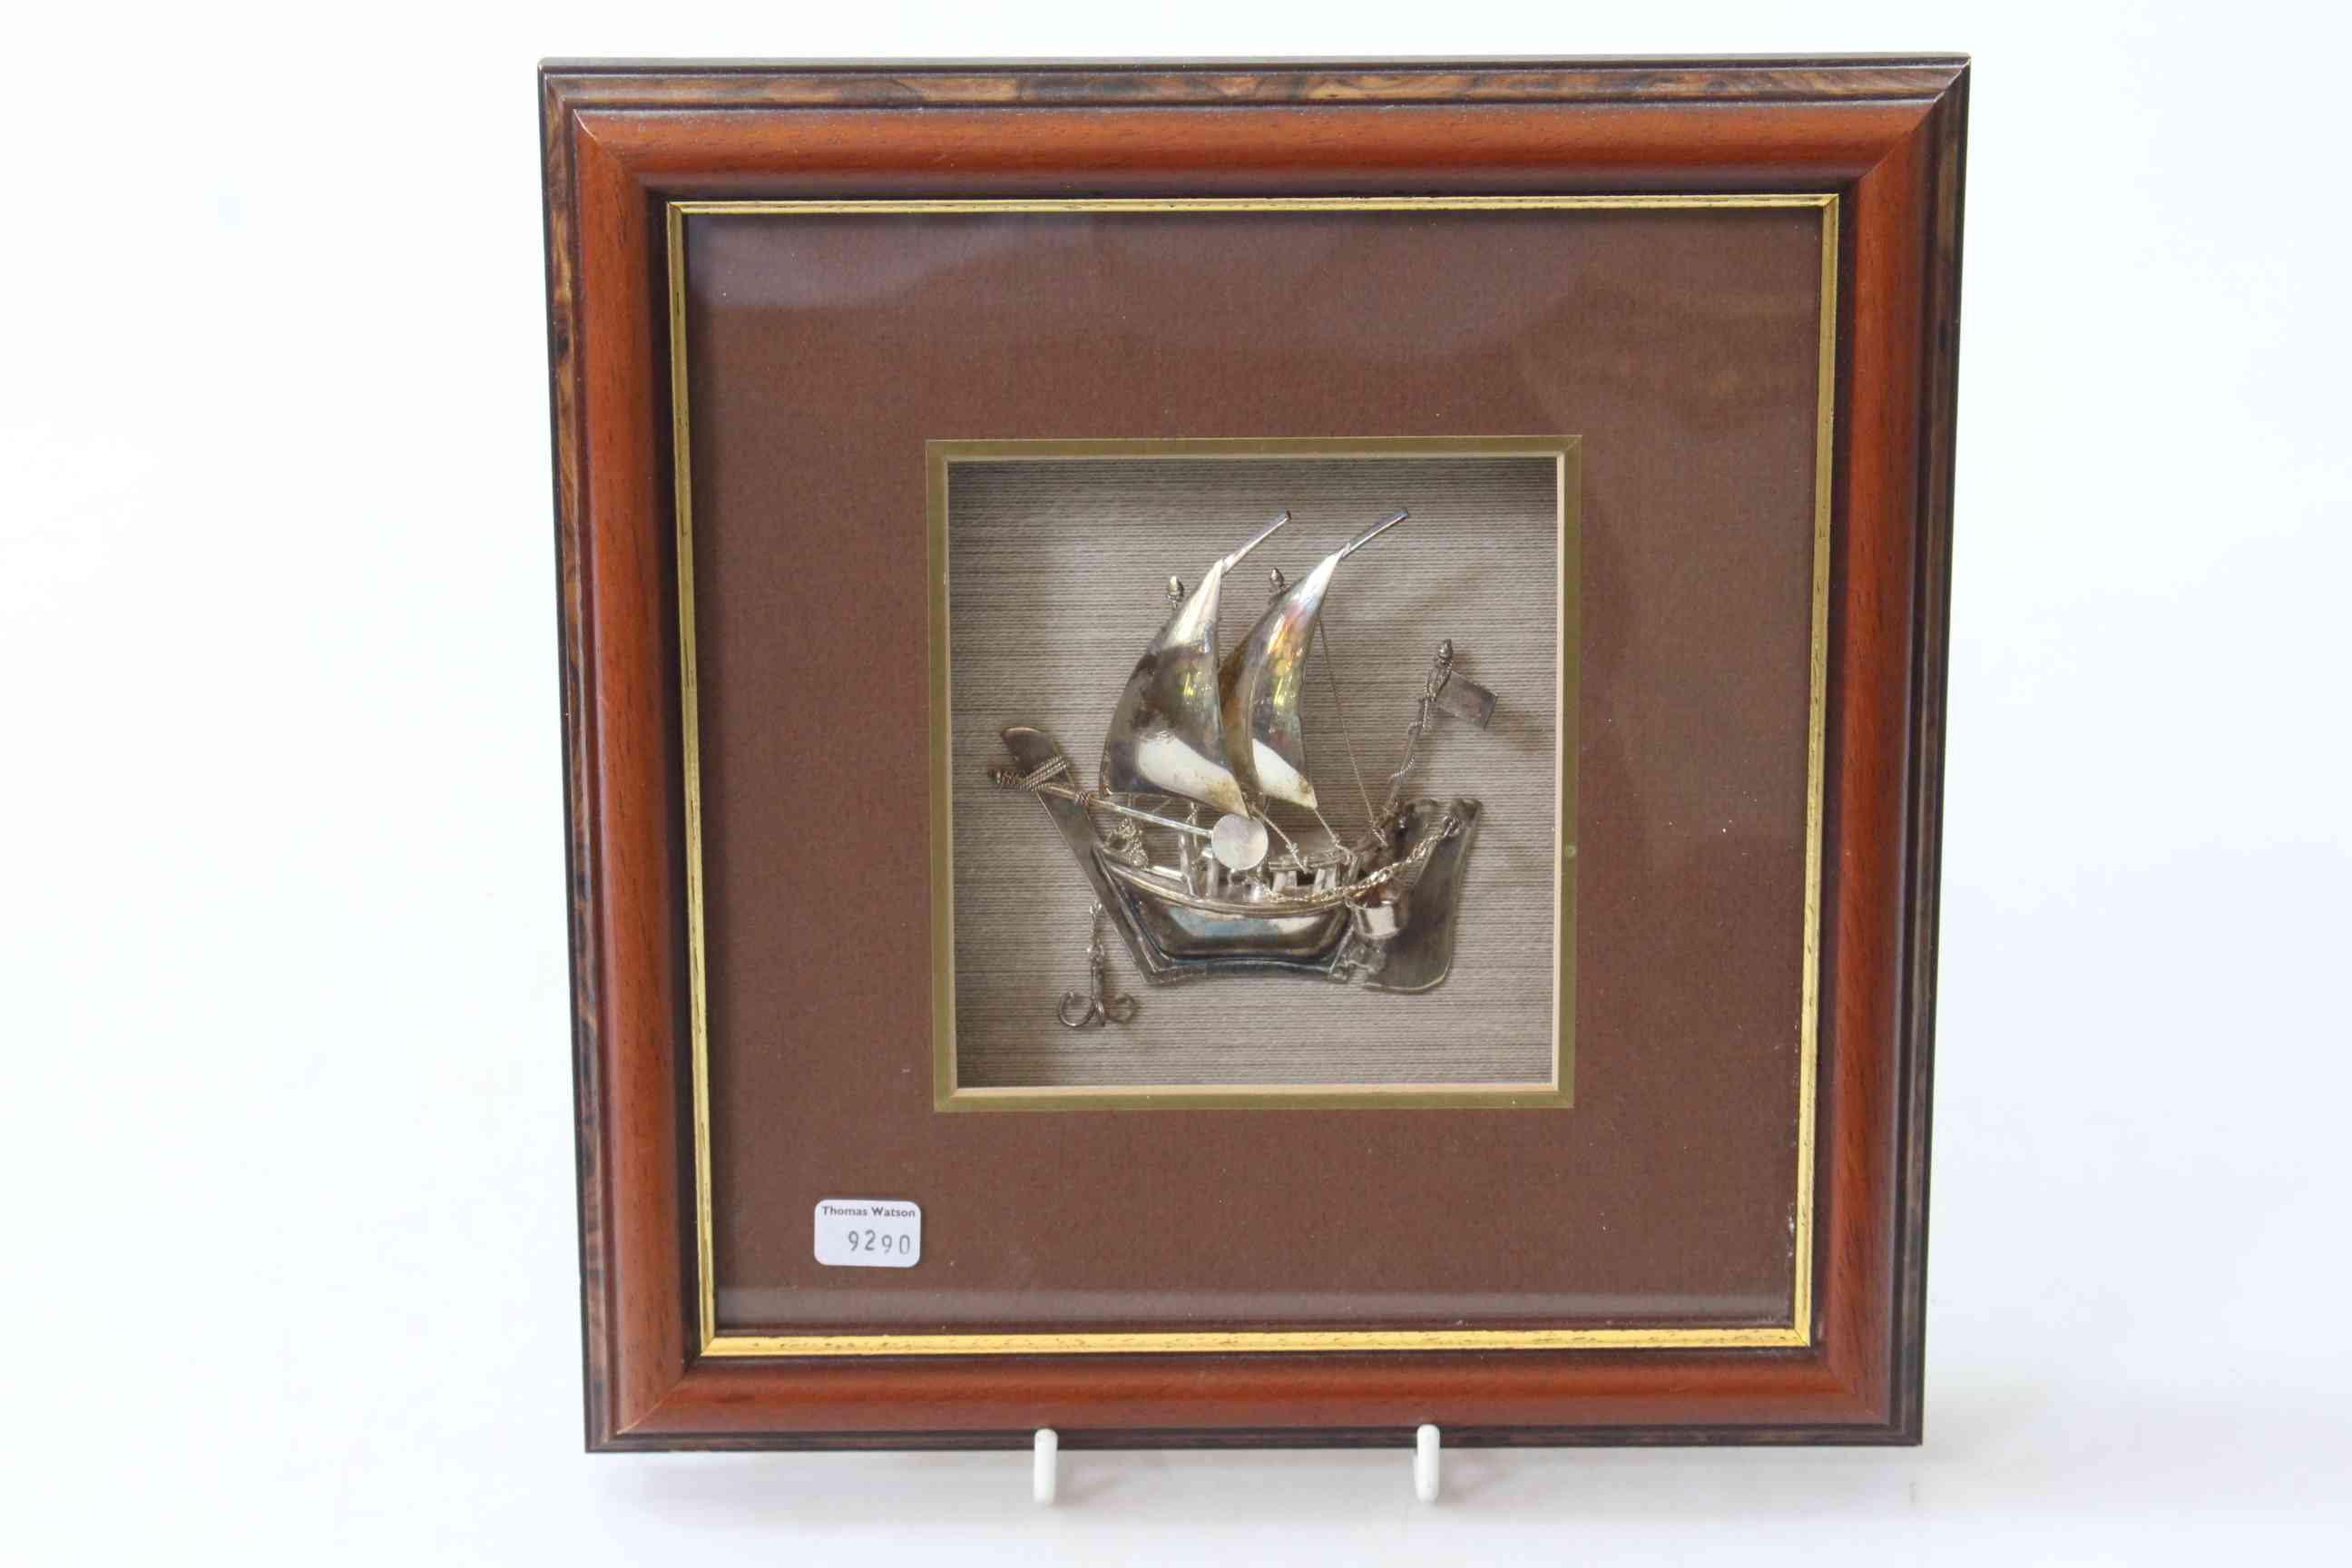 Framed silver model of a junk, together with six silver napkin rings and two salt spoons. - Image 2 of 2